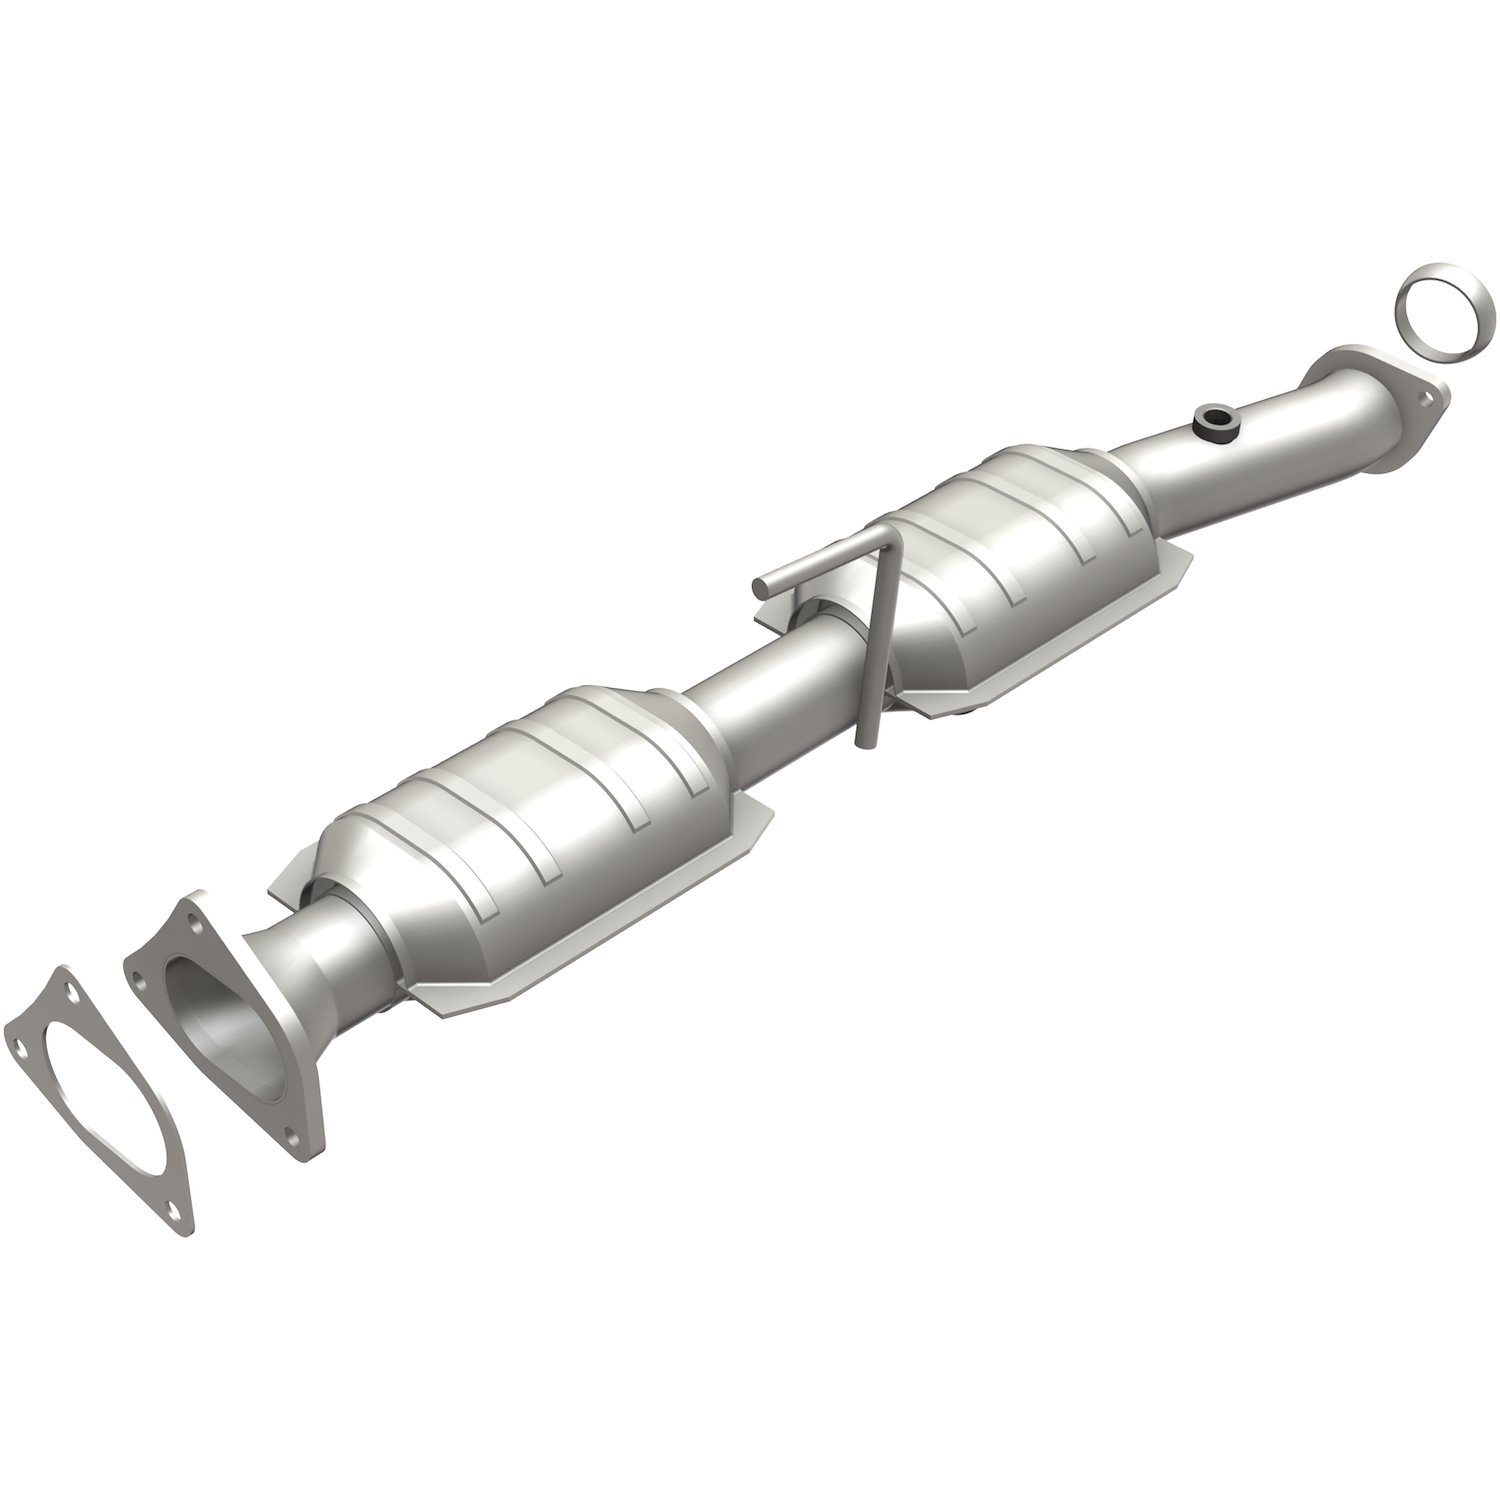 California Grade CARB Compliant Direct-Fit Catalytic Converter 441116